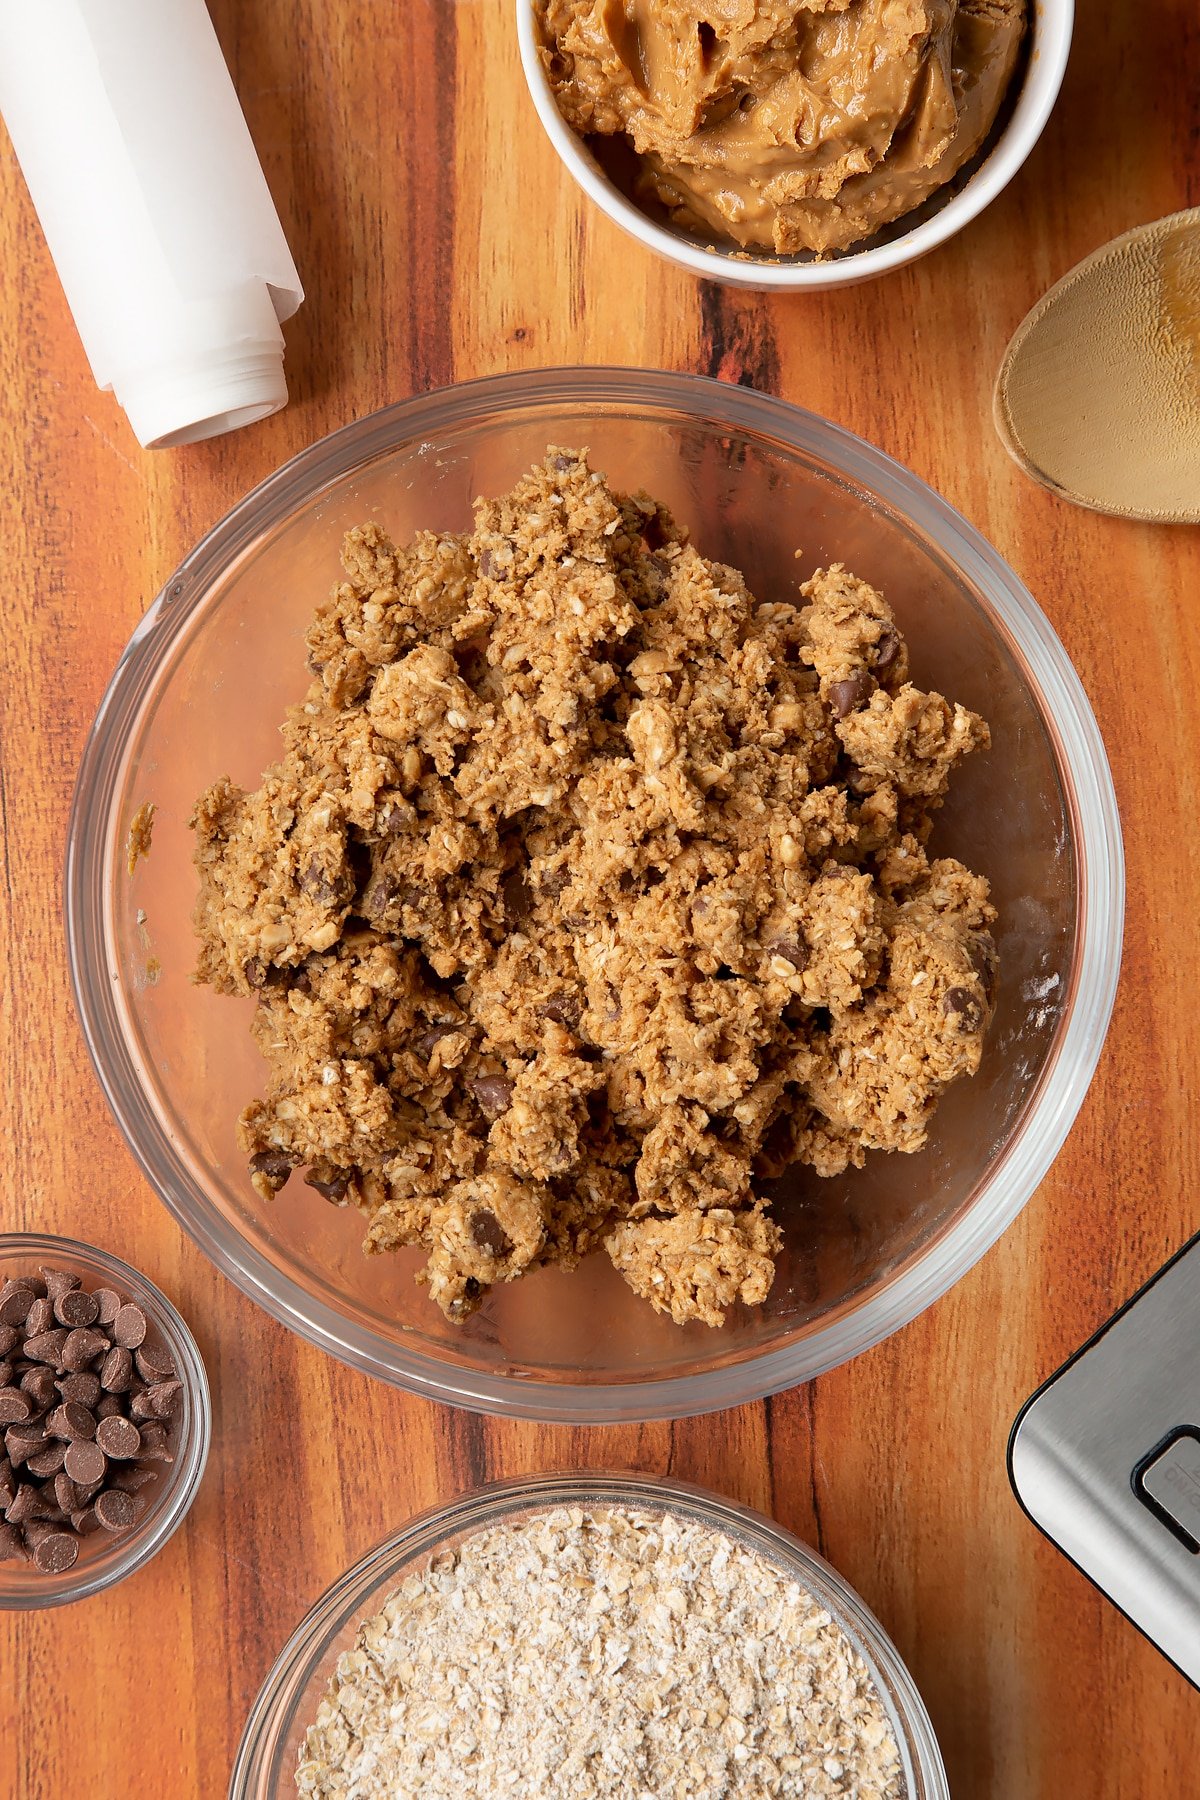 Rolled oats, peanut butter and chocolate chips mixed together in a glass mixing bowl. Ingredients to make 3 ingredient peanut butter and oatmeal balls surround the bowl.